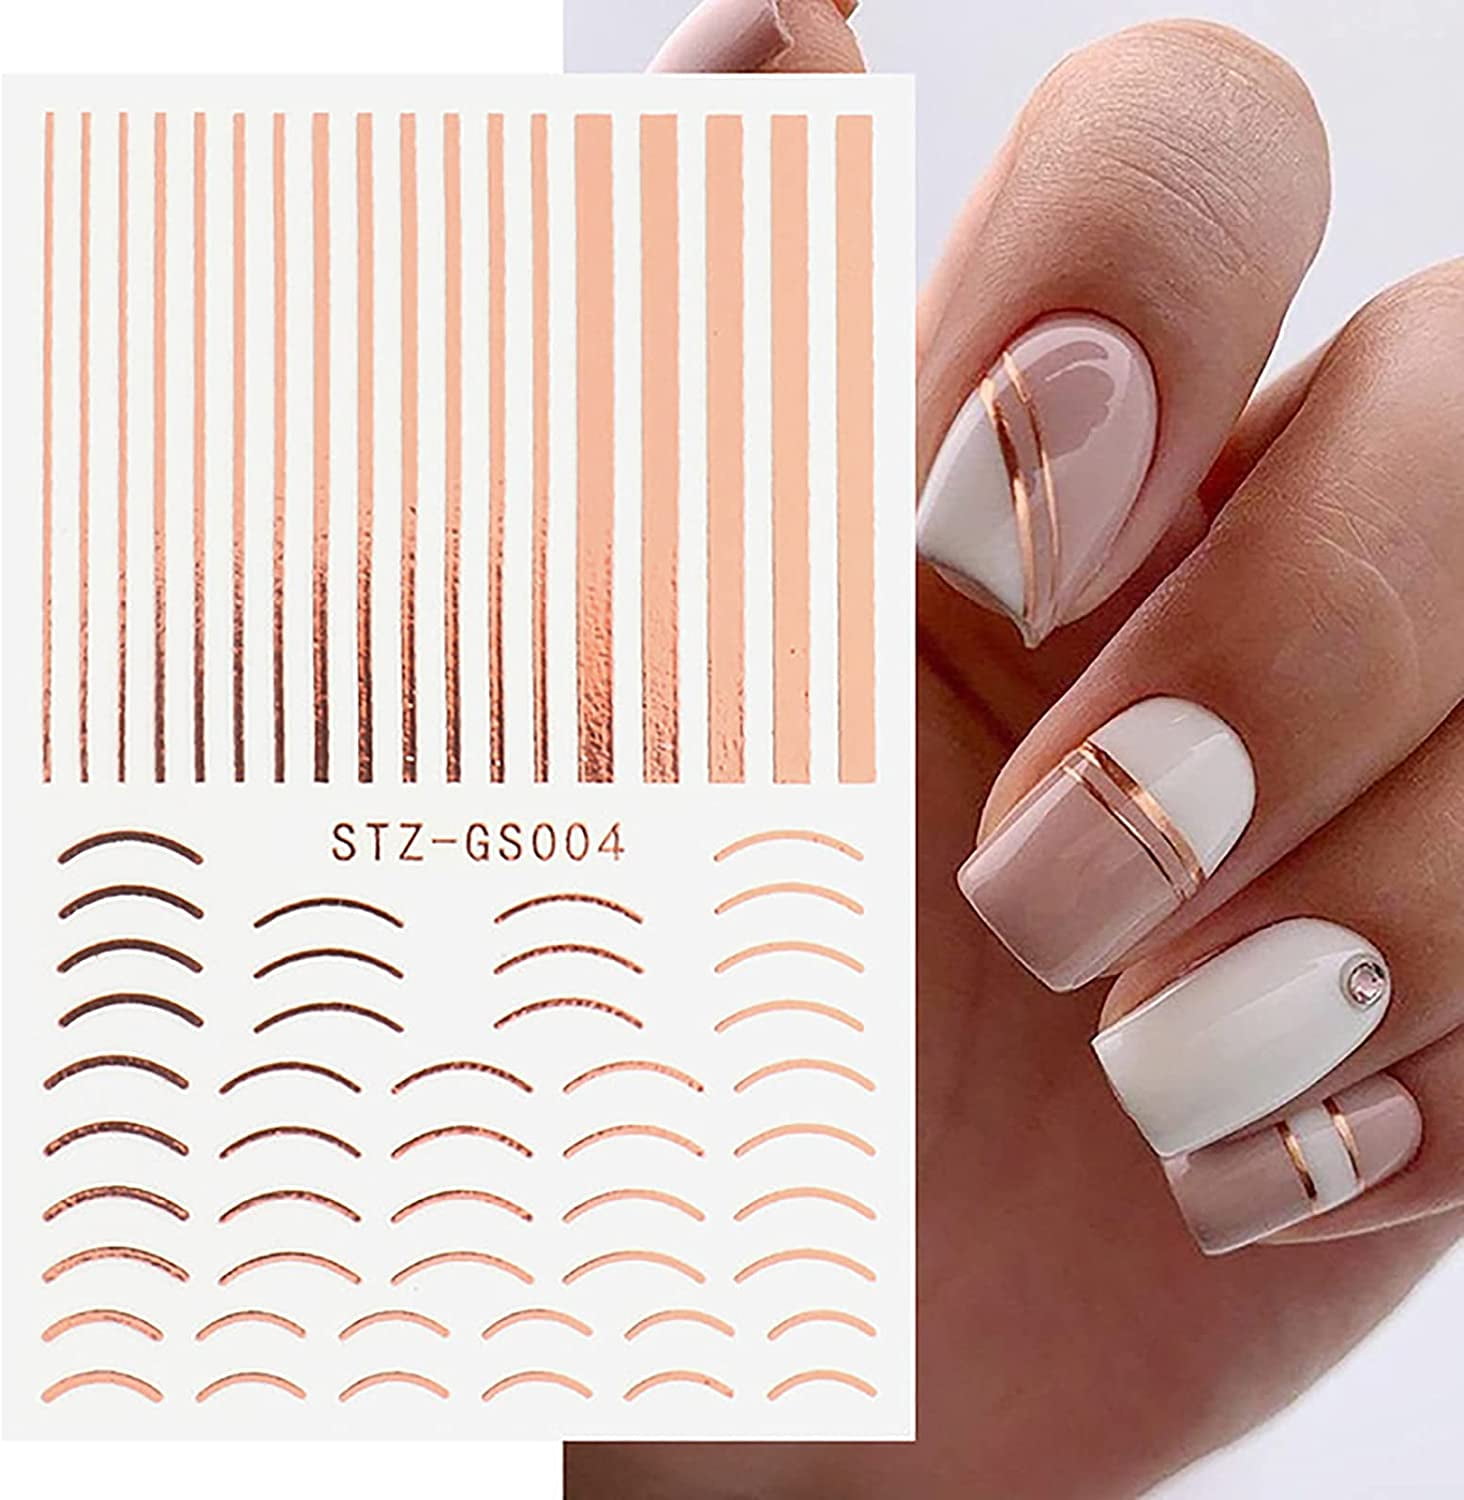 Straight lines | Line nail designs, Lines on nails, French tip nail designs